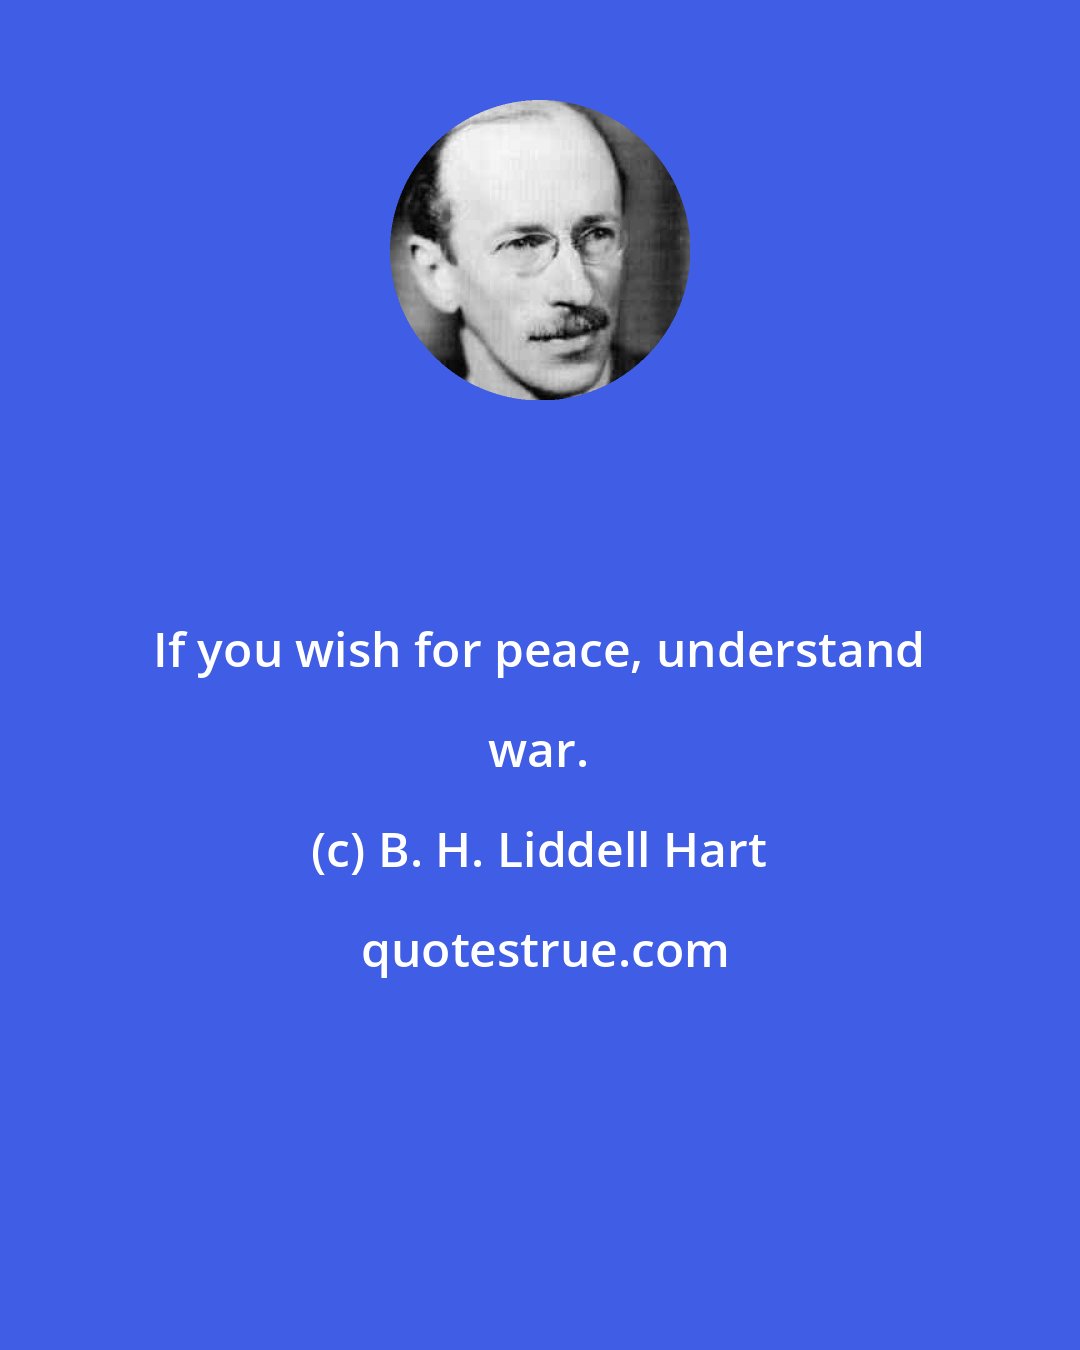 B. H. Liddell Hart: If you wish for peace, understand war.